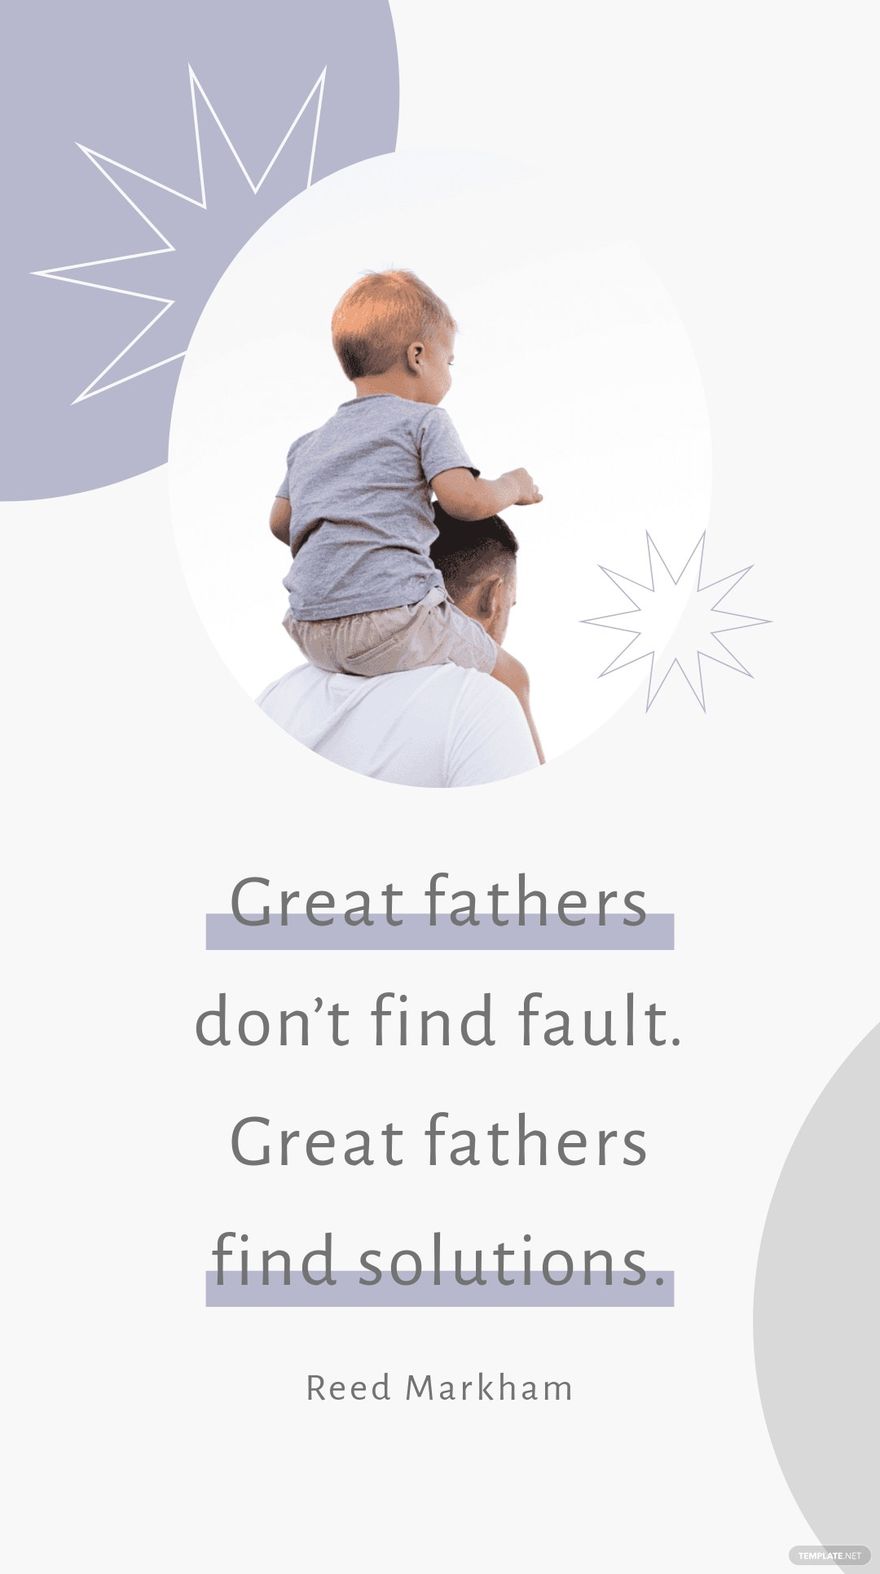 Reed Markham - Great fathers don’t find fault. Great fathers find solutions.